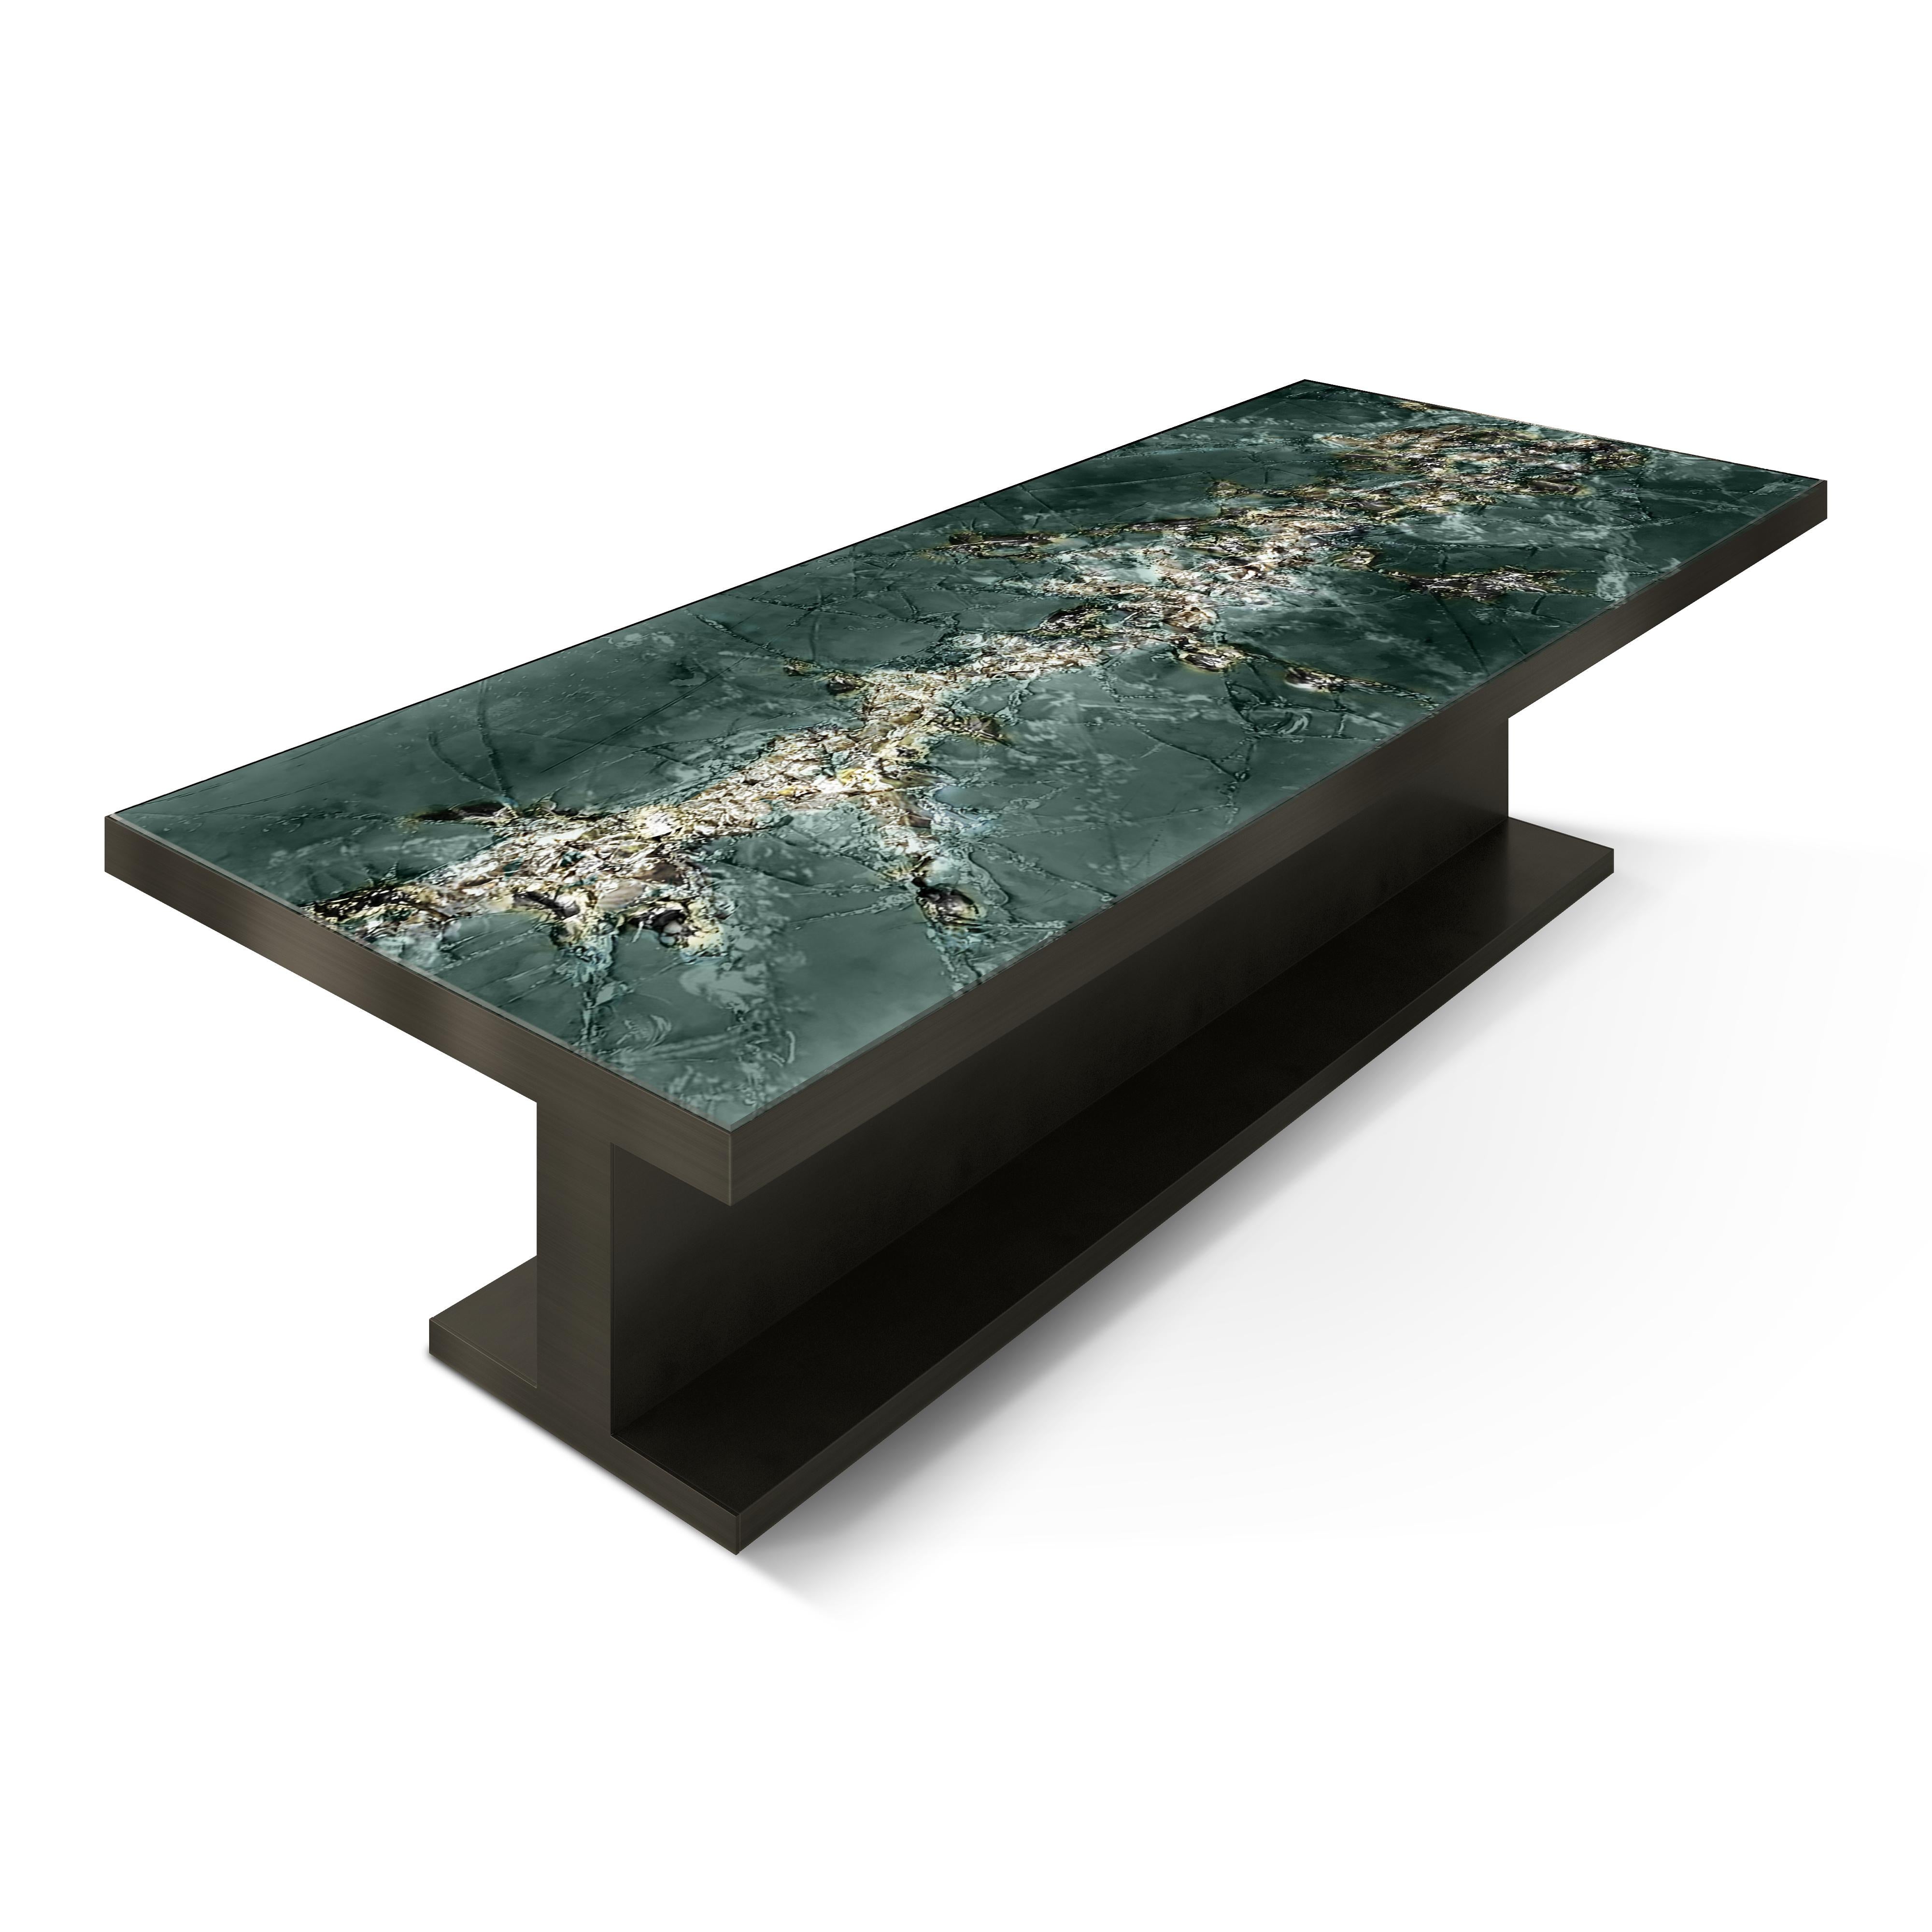 Lillian Gorbachincky's signature limited edition KORA dining table with art glass top and bronze base designed and fabricated by Lillian Gorbachicnky Atelier.

Overall dimensions: 96